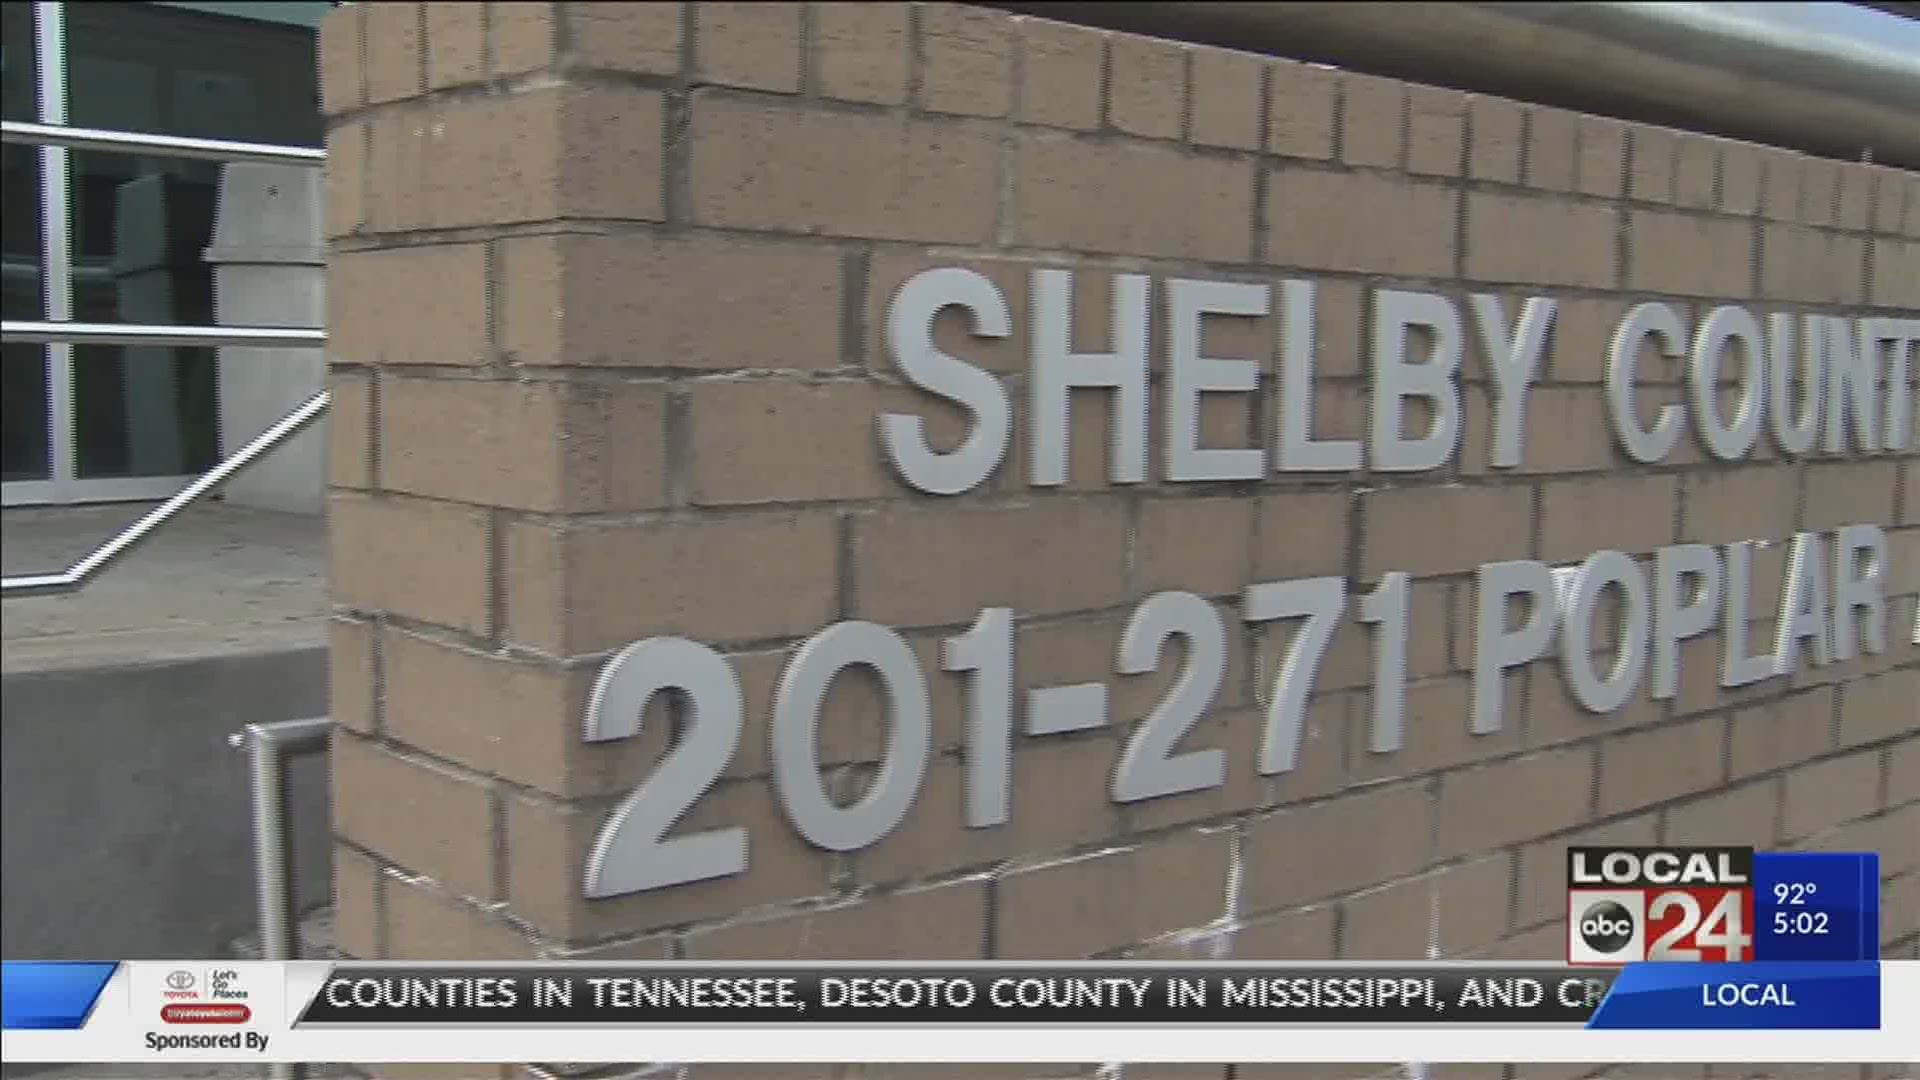 Mayor Lee Harris signed an Executive Order to expand protections for inmates in the Shelby County Division of Corrections.